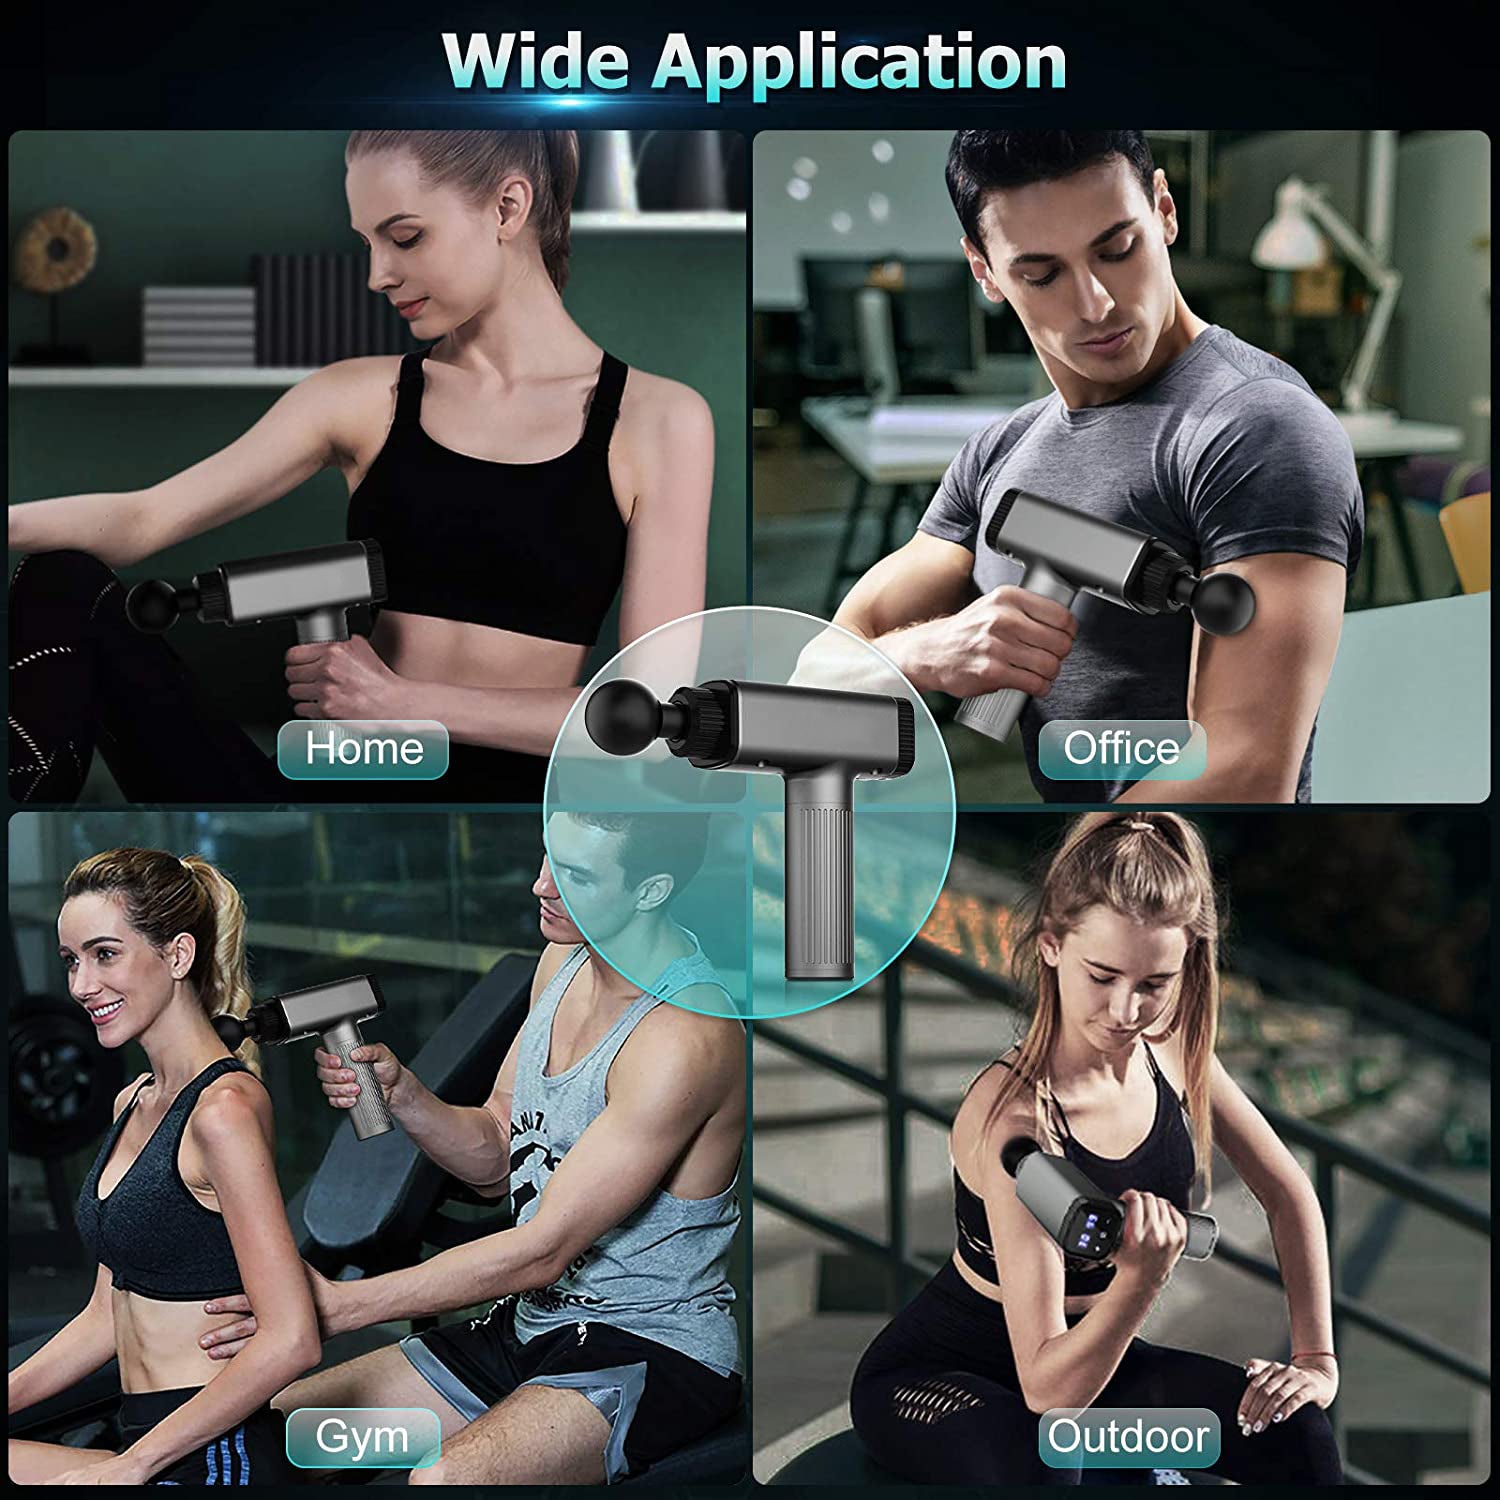 2600 mAh Handheld Deep Tissue Massager with Heat for Muscles, Back